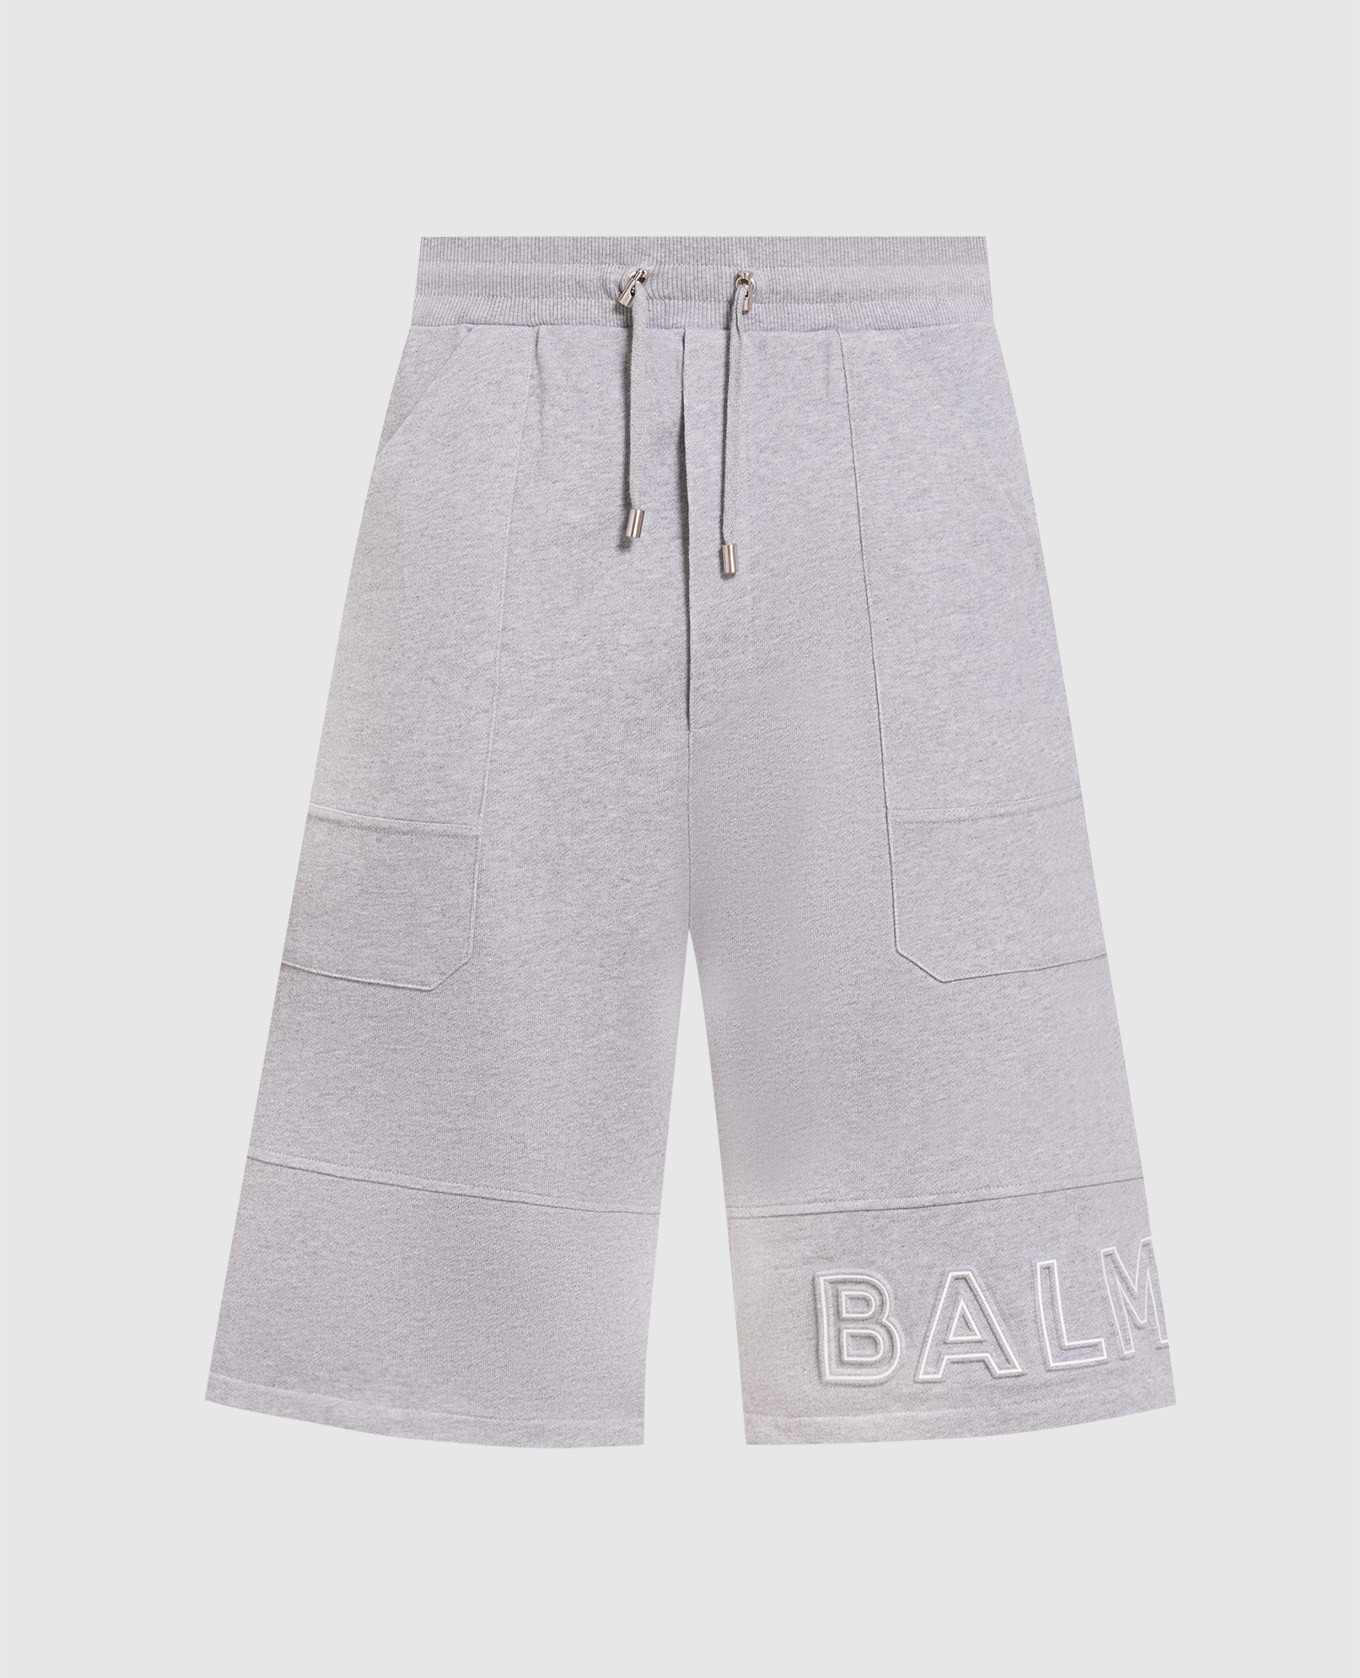 Gray shorts with textured logo